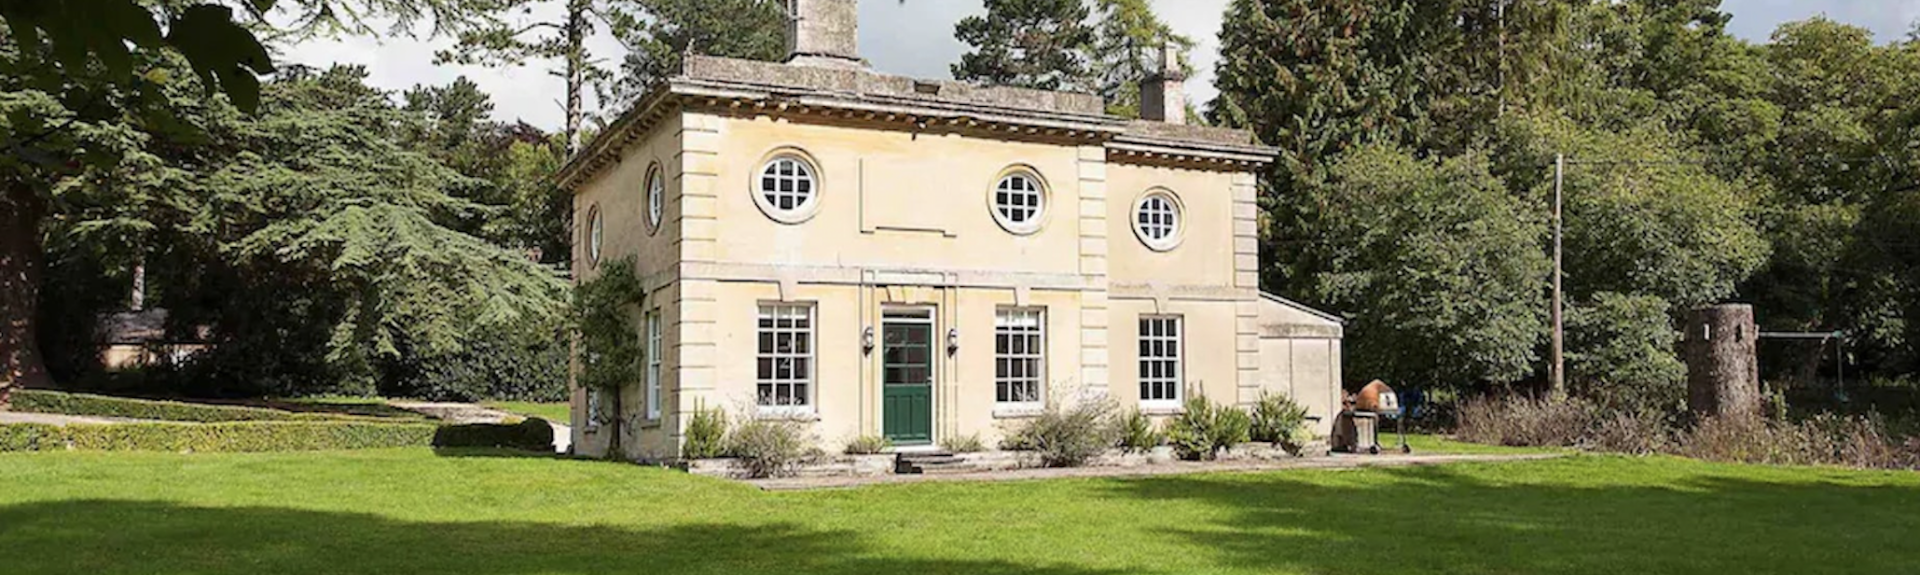 A period honeystone estate house with large windows overlooks fields and woodlands